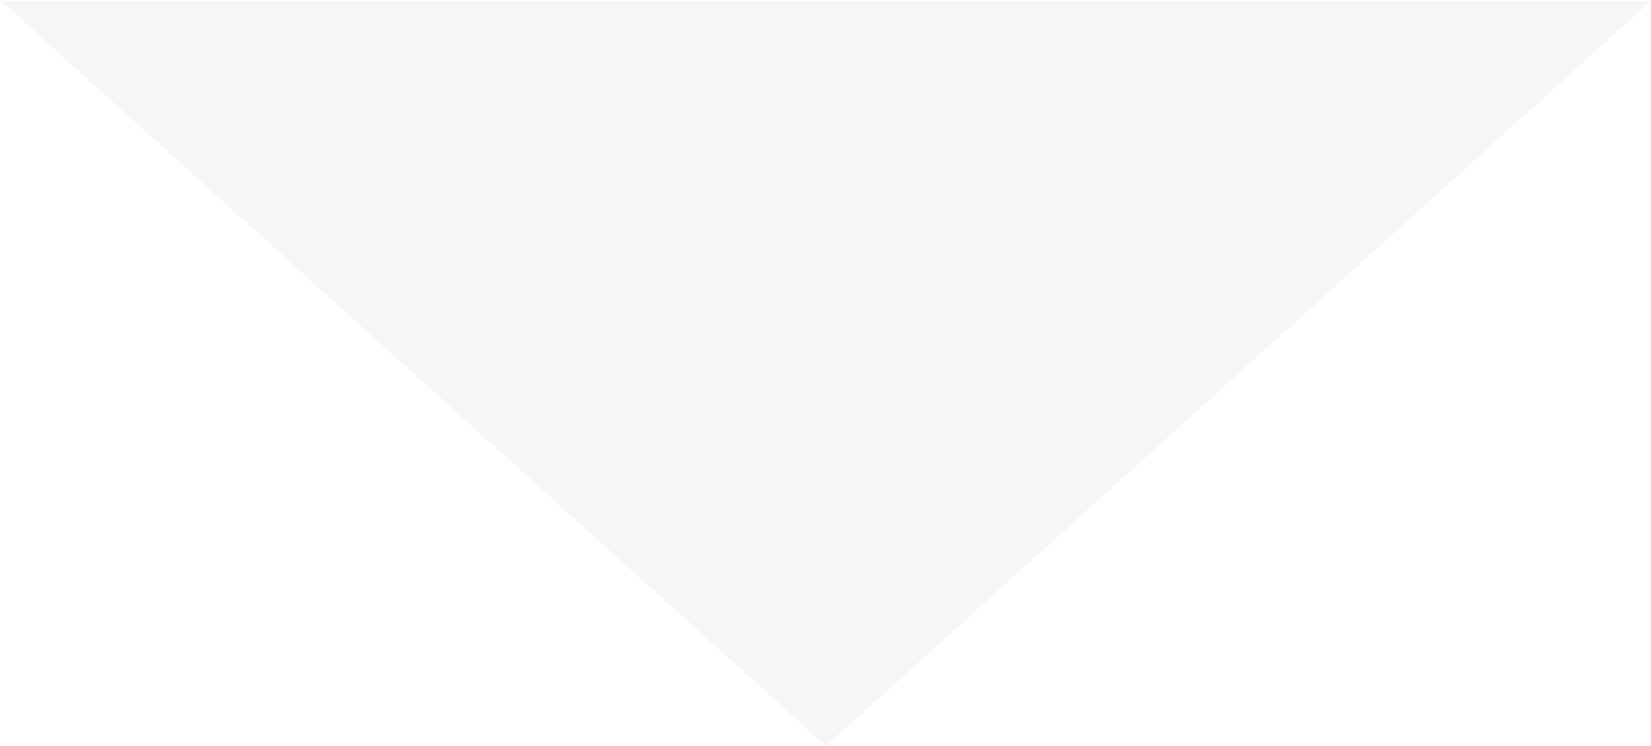 Download White Triangle Dark Background | Wallpapers.com